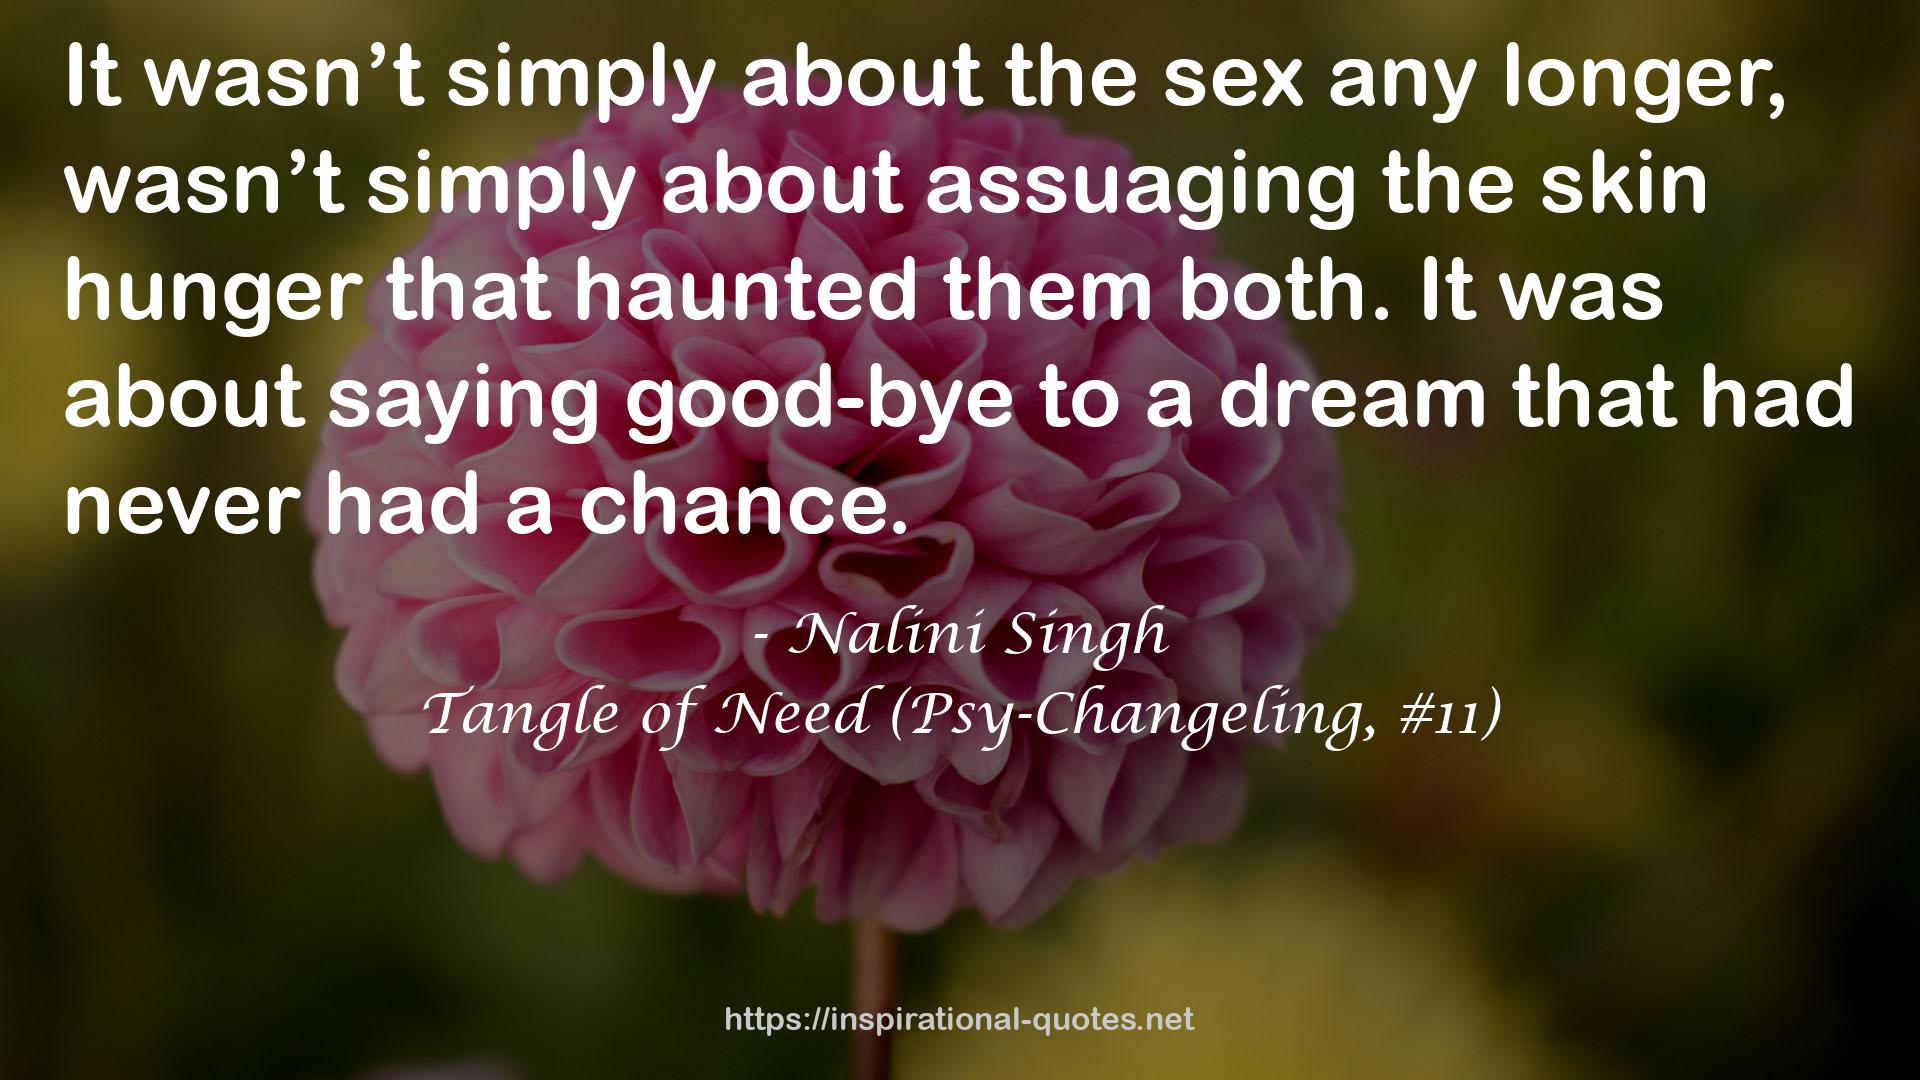 Tangle of Need (Psy-Changeling, #11) QUOTES